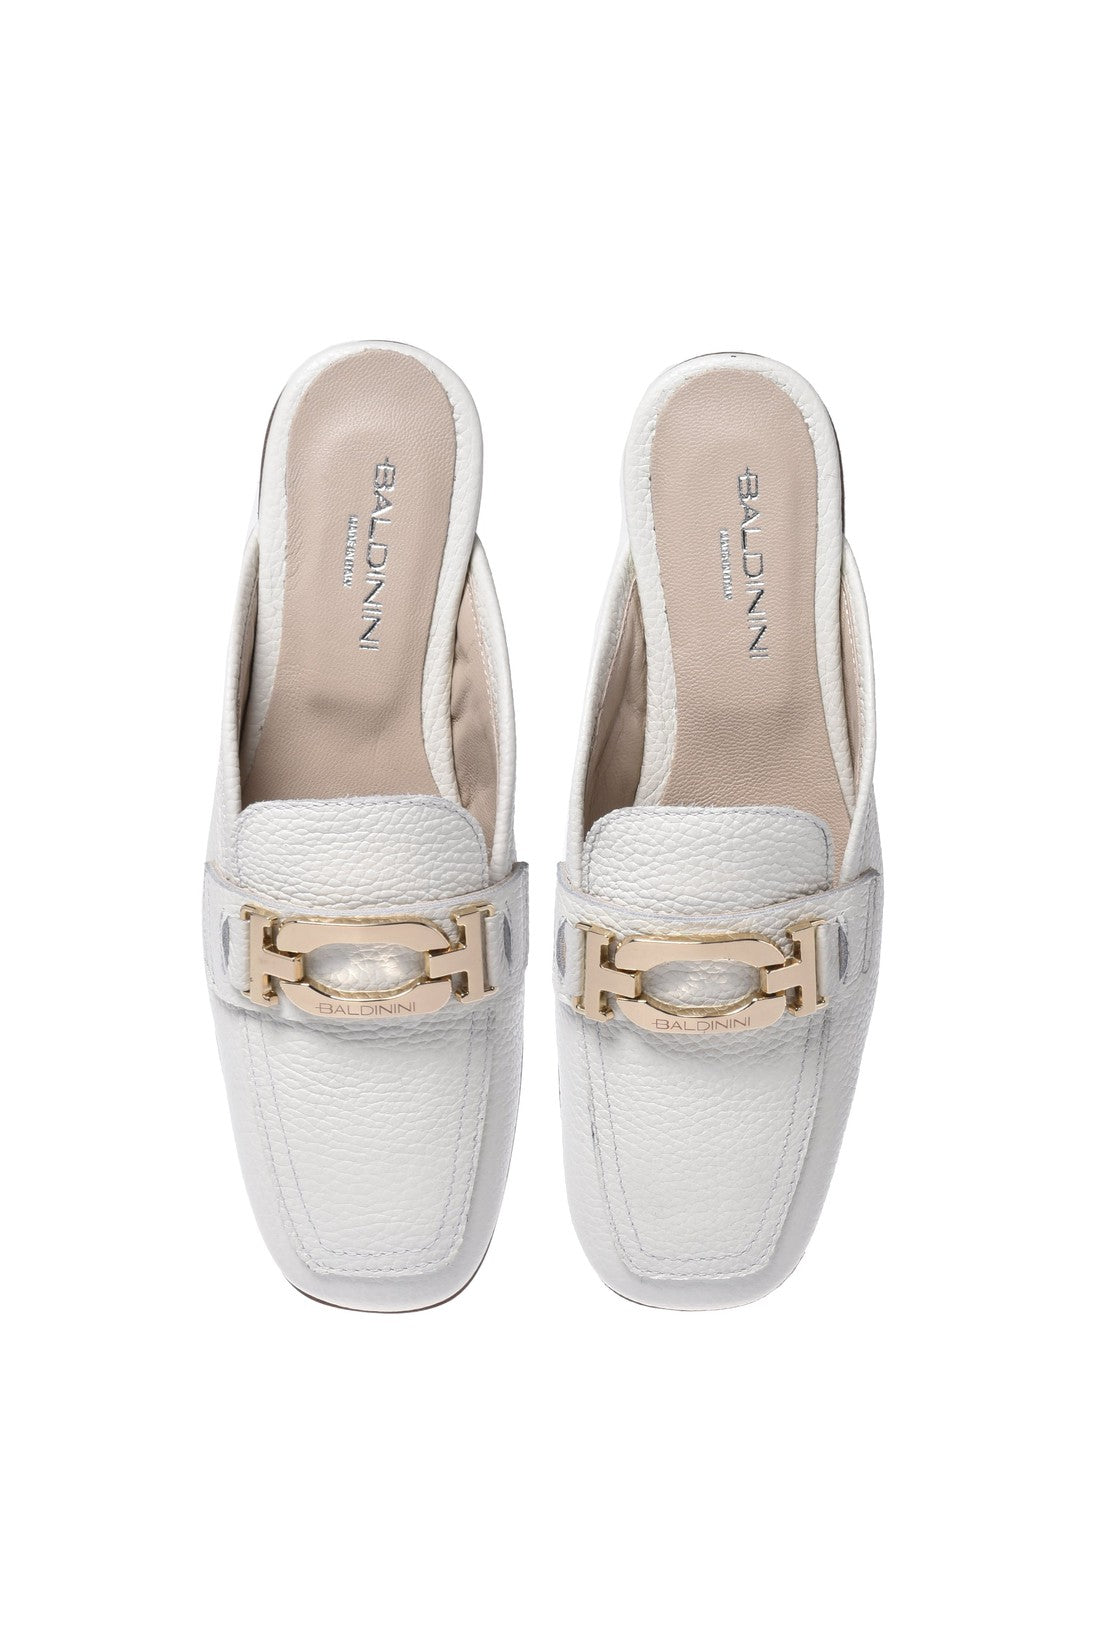 Loafer in cream tumbled leather